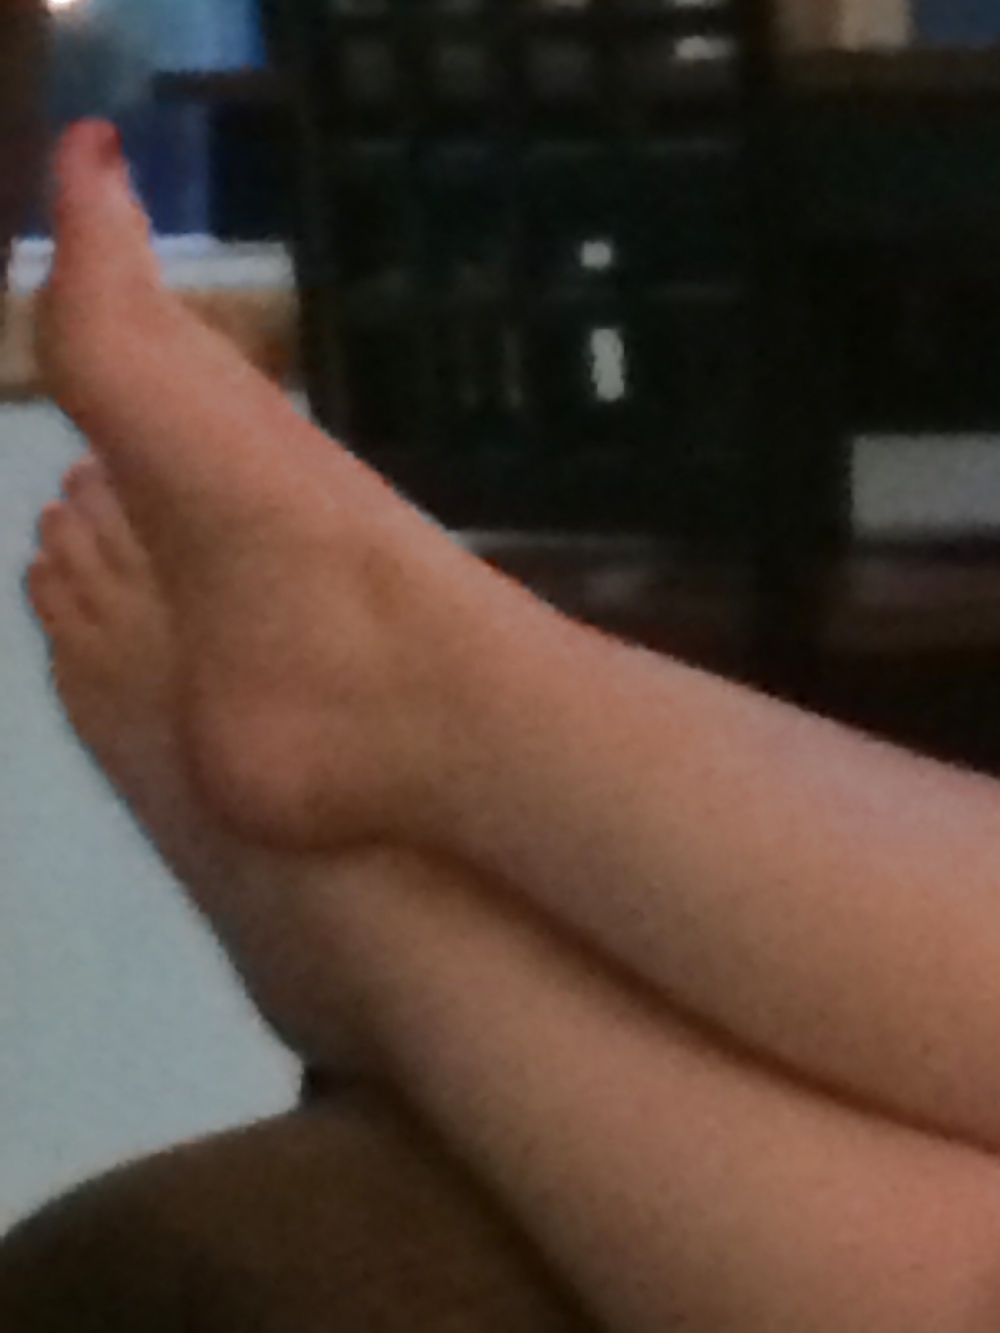 Wife's dirty feet from wearing flip flops all day #27274781